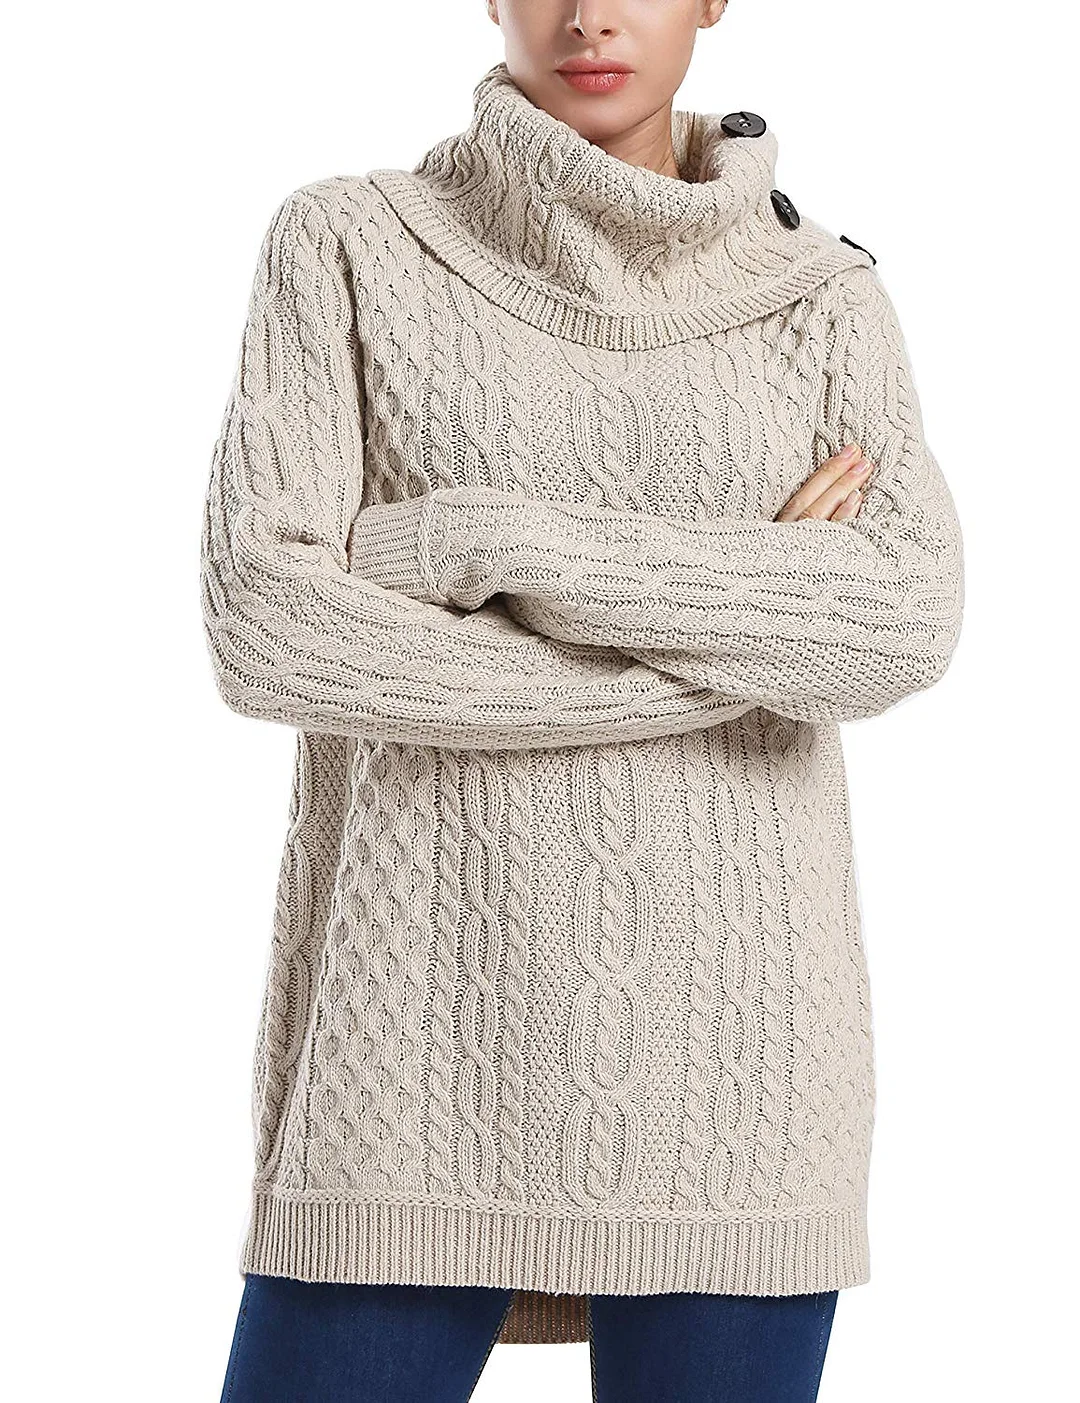 Women's Turtleneck Sweater Cable Knit Button Tunic Pullover Tops